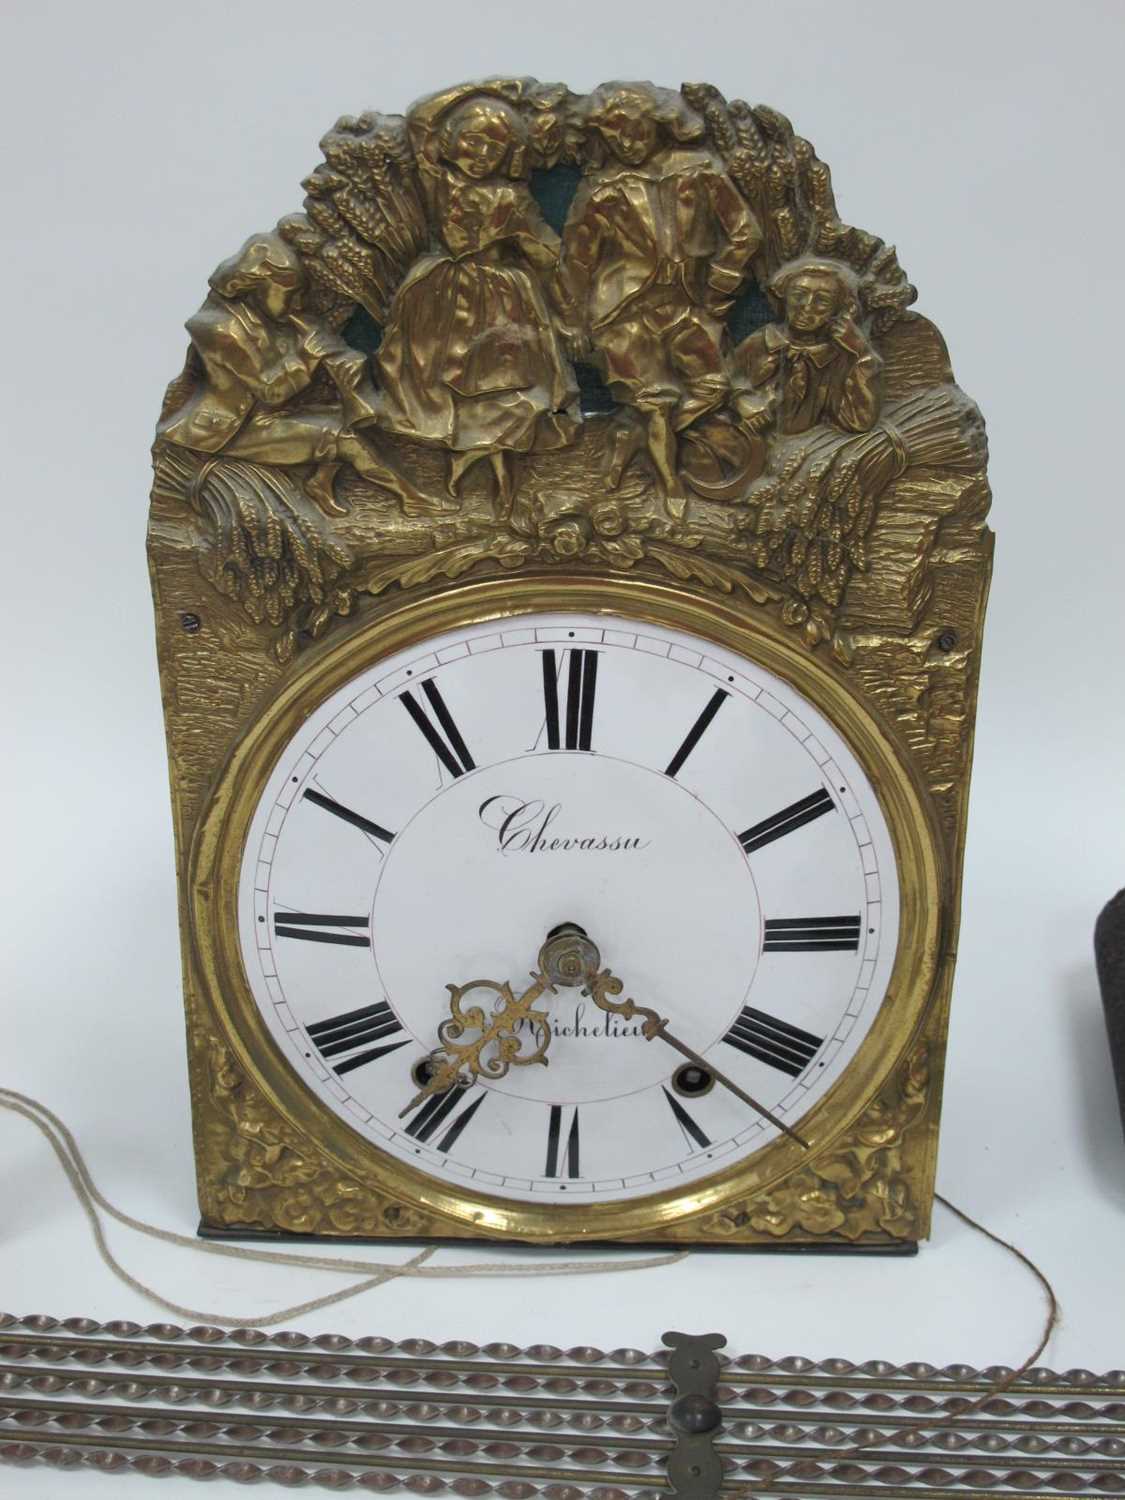 A Mid-Late XIX Century French Wall Clock, the white enamel dial inscribed "Chevassy a Reichelieu" - Image 2 of 6